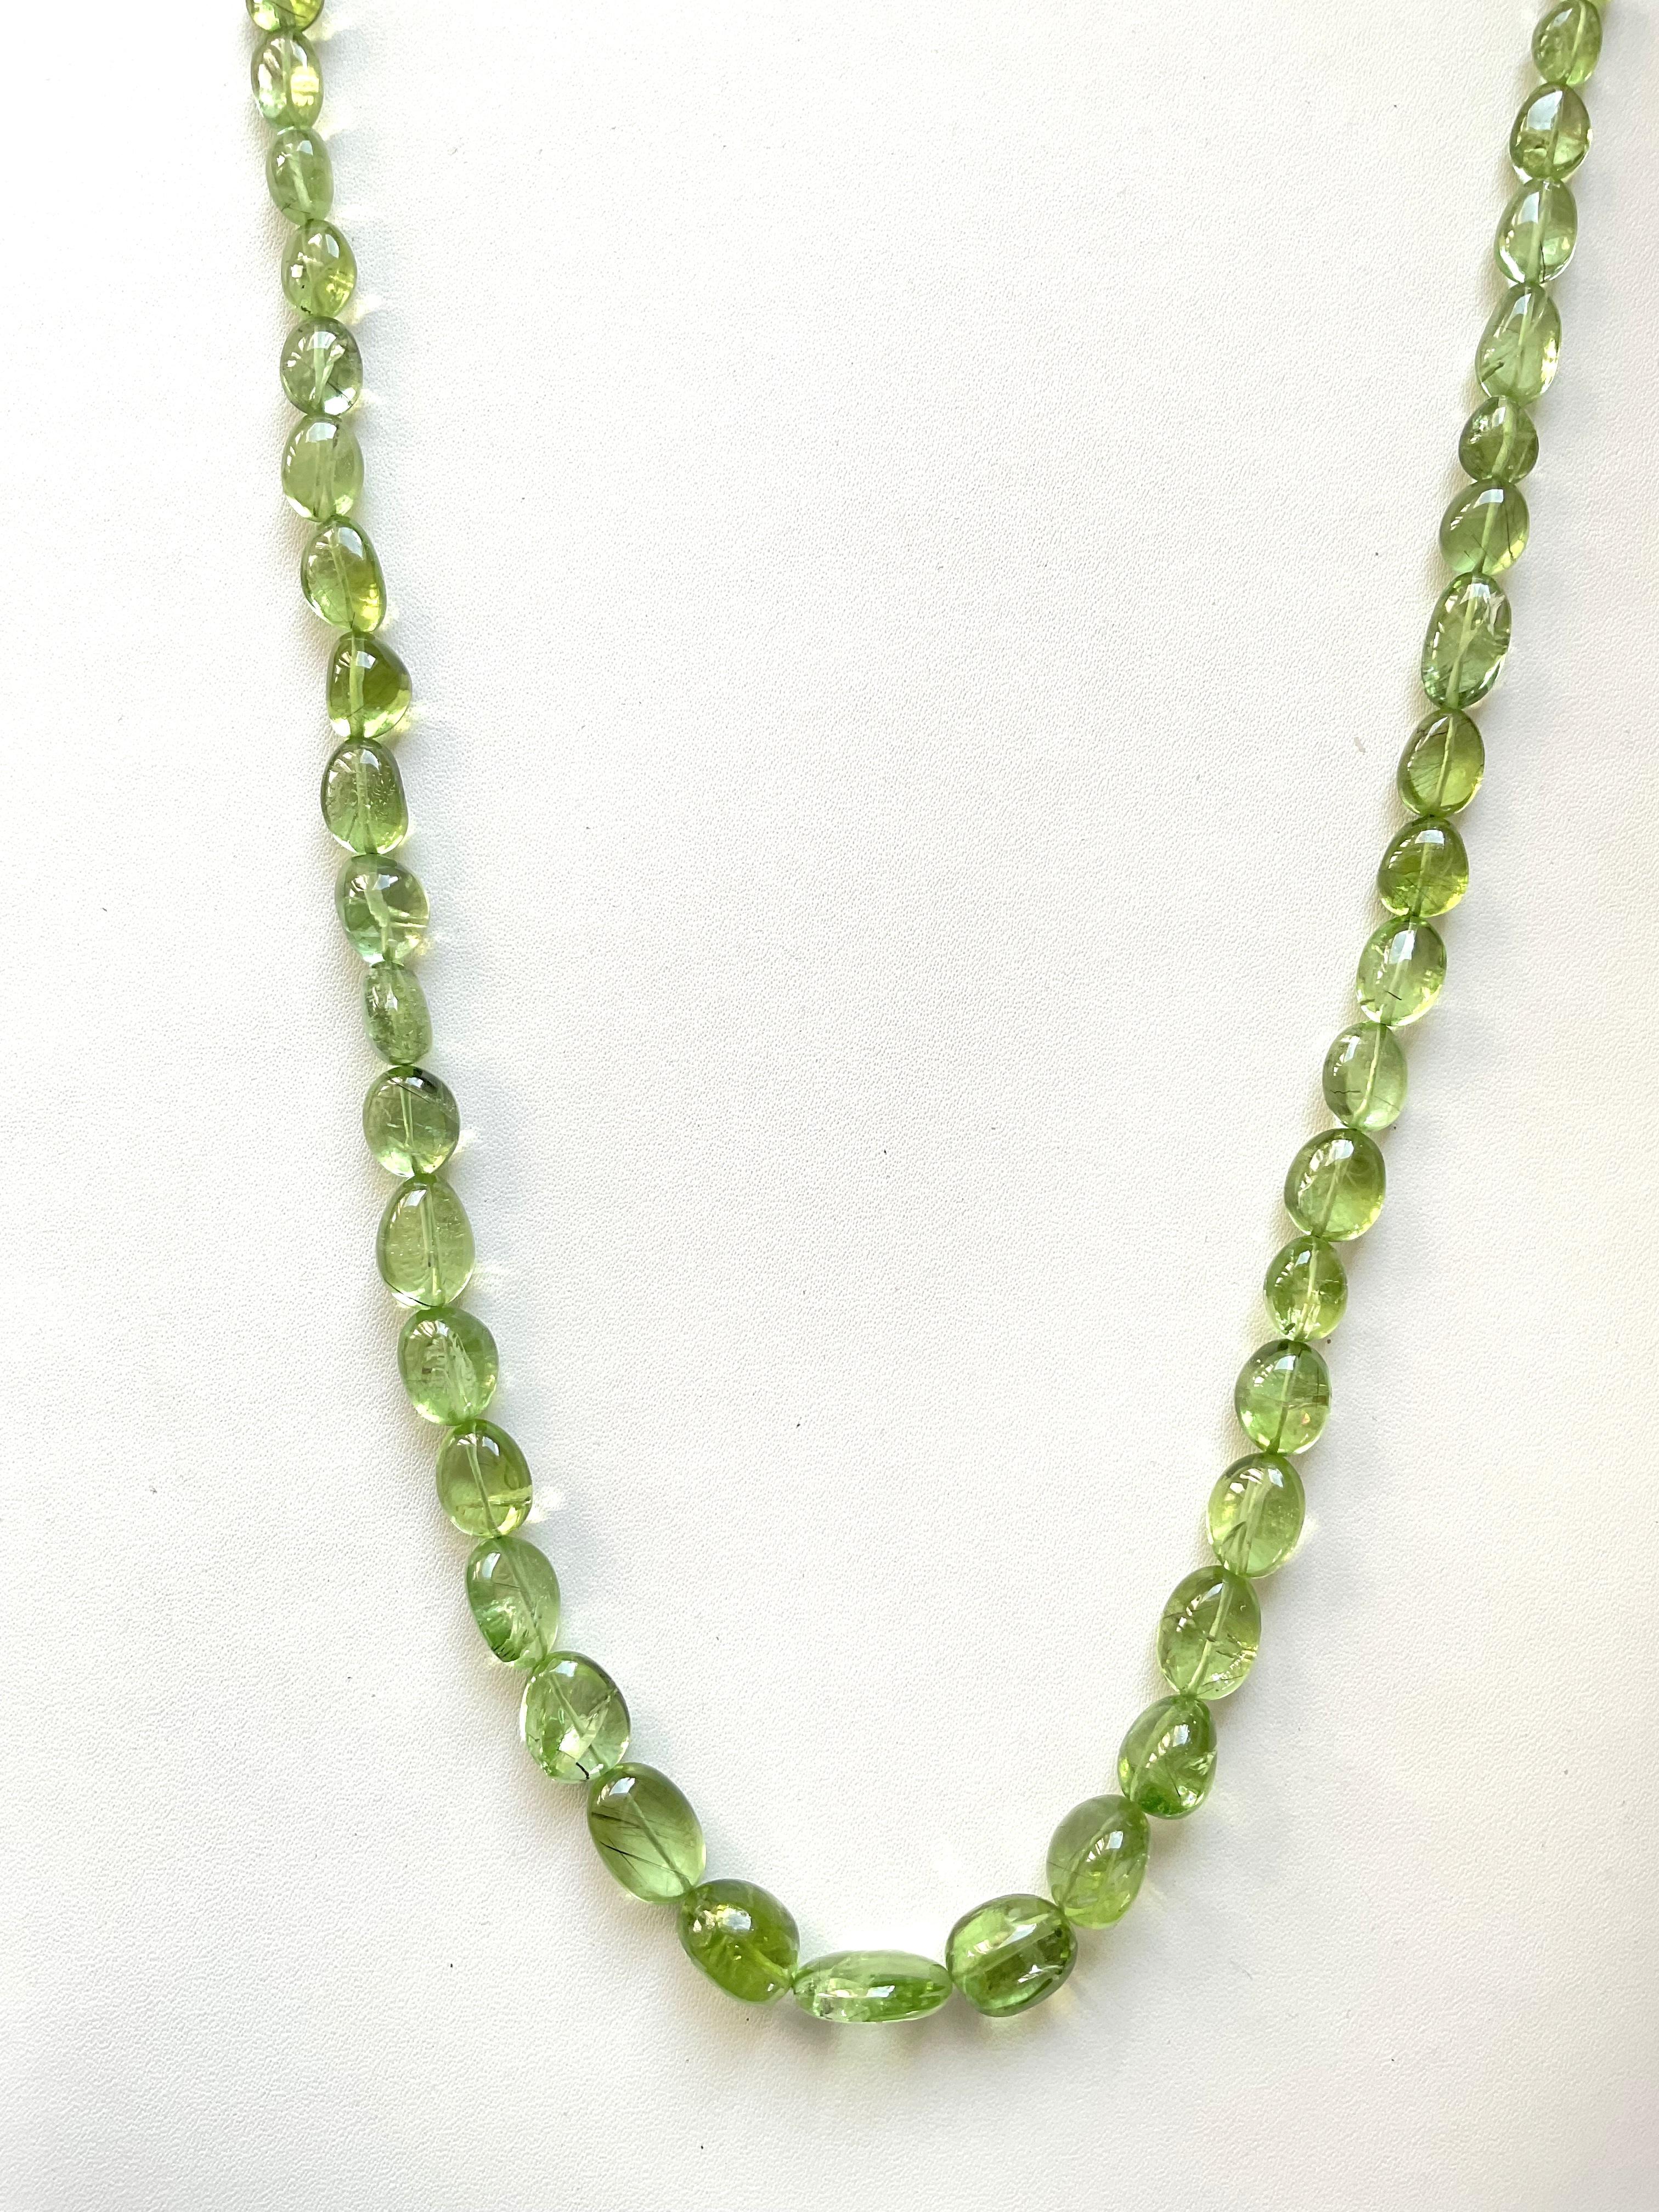 233.75 carats apple green peridot top quality plain tumbled natural necklace gem For Sale 1